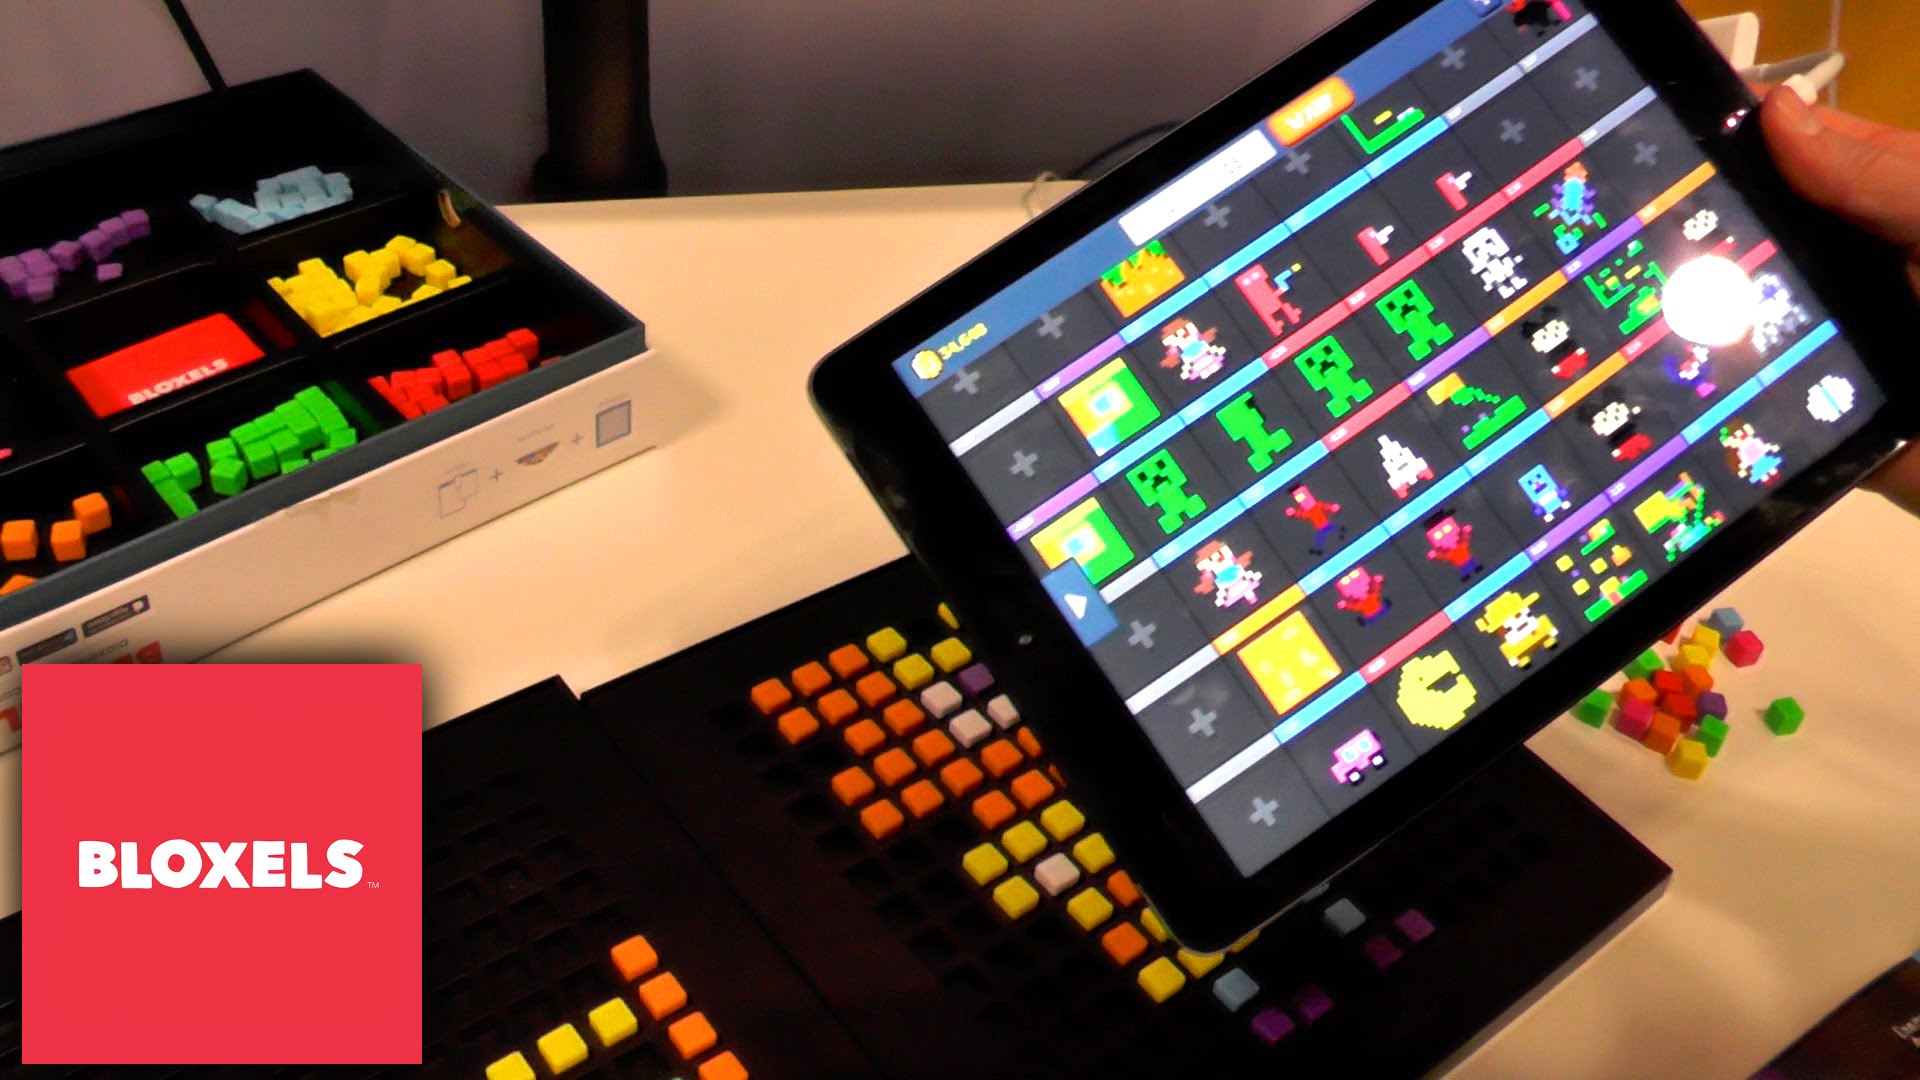 Bloxels – Retro Game Maker w/ “Kids as Video Game Makers” Competition Details